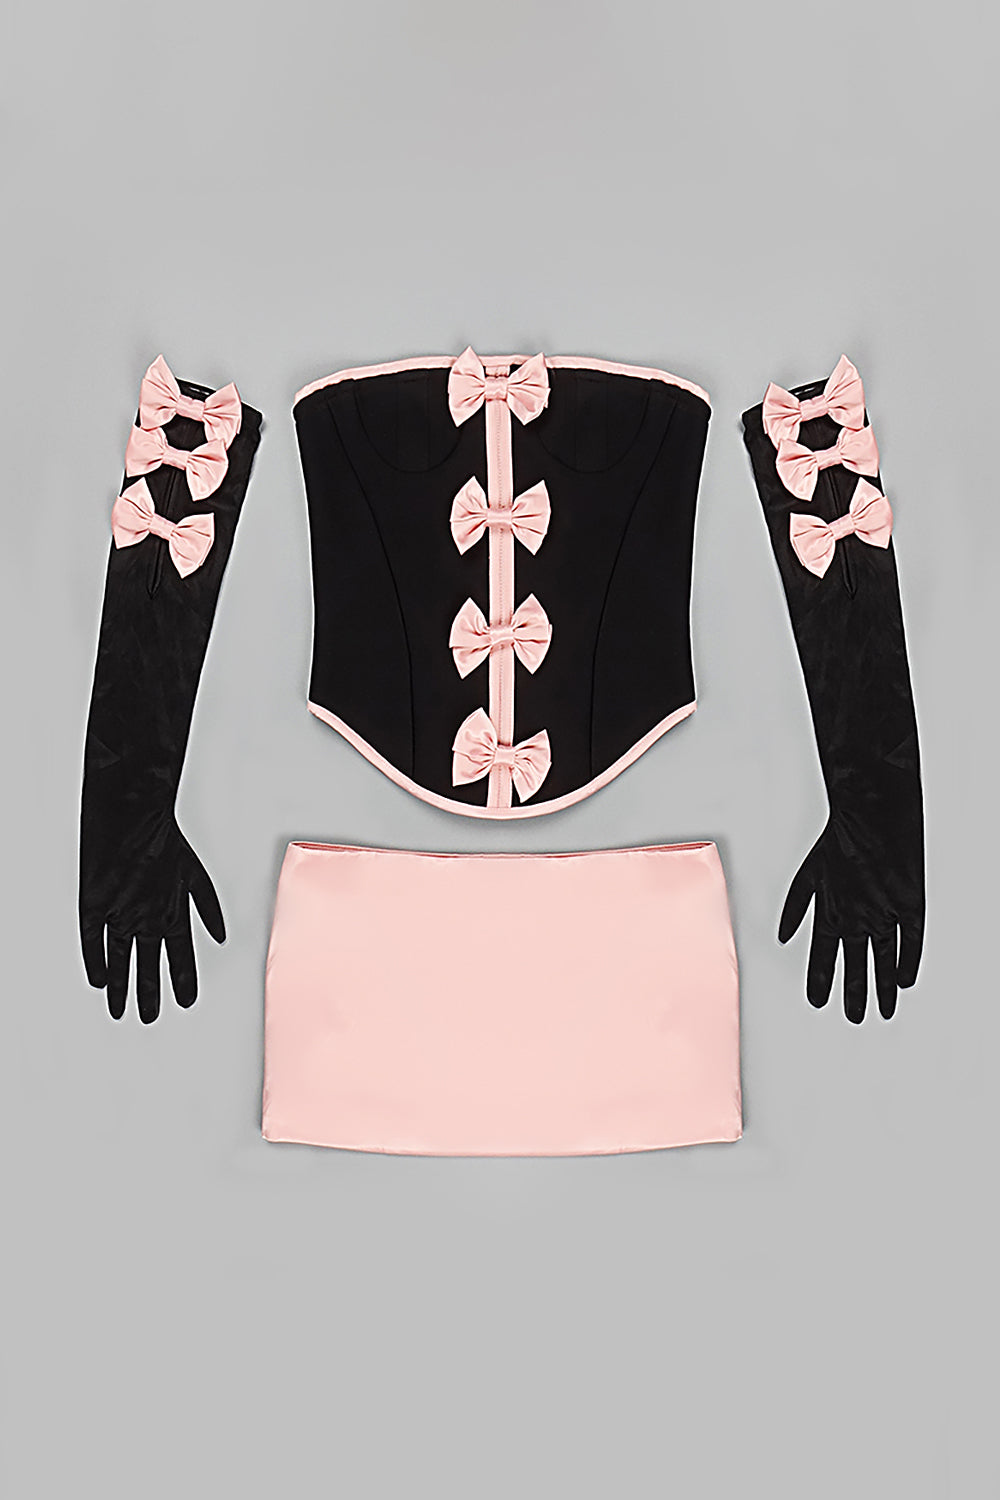 Rocks Bow-Lined Corset Top And Mini Skirt and Sheer Gloves